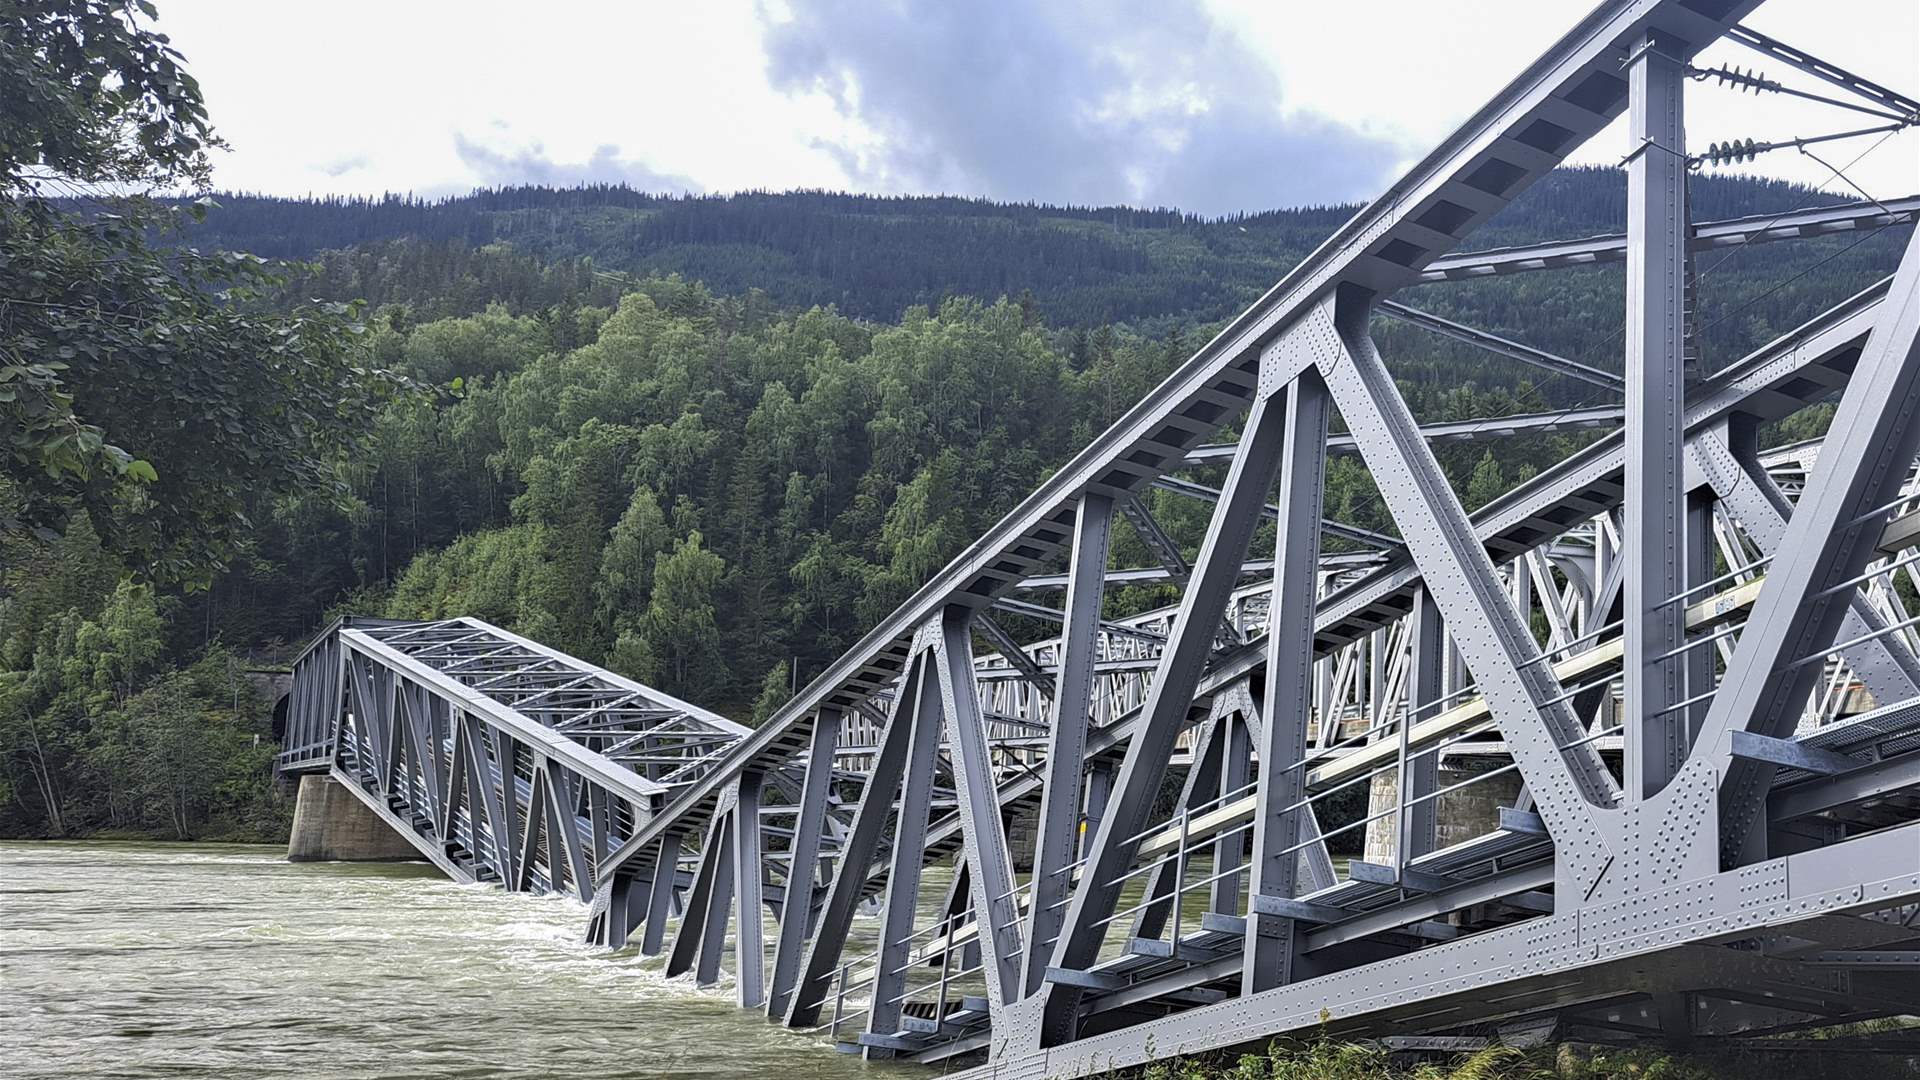 Collapse of railway bridge in Norway due to floods leaving no victims